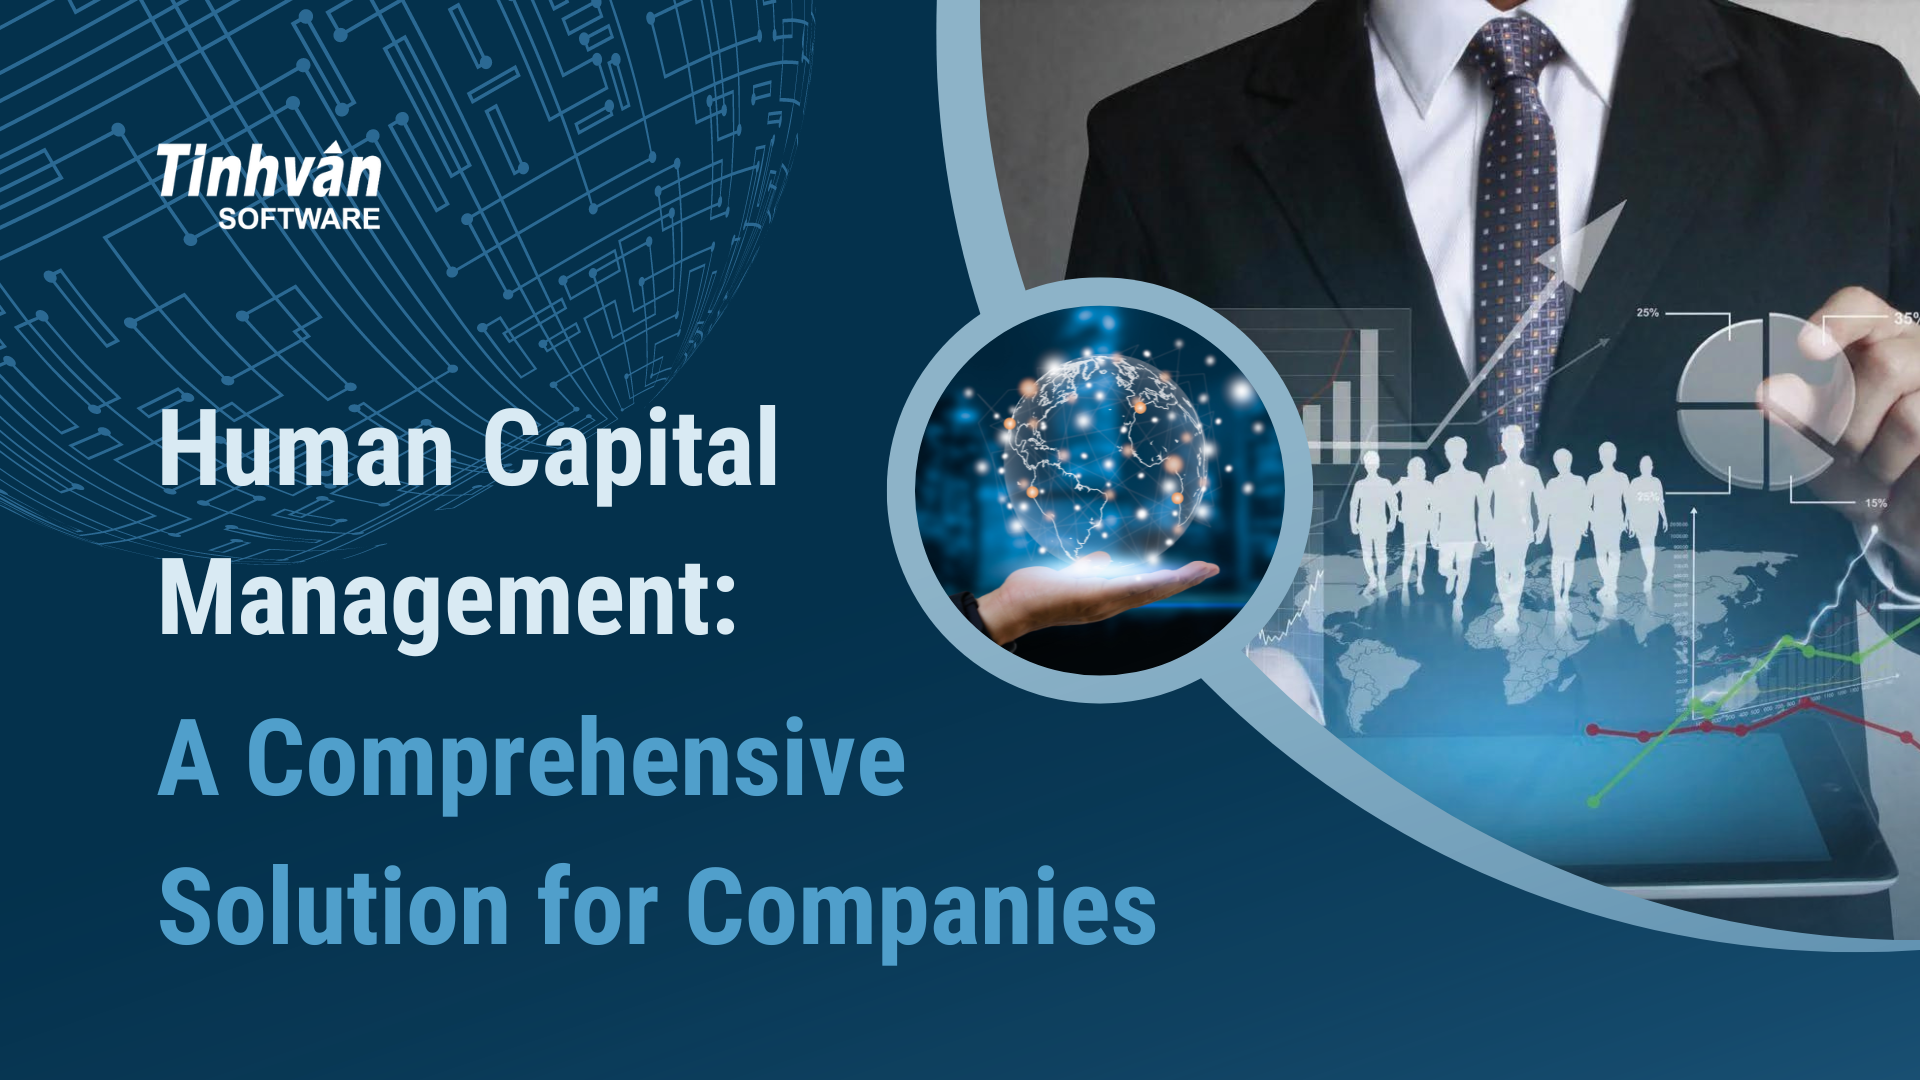 Human Capital Management: A Comprehensive Solution for Companies